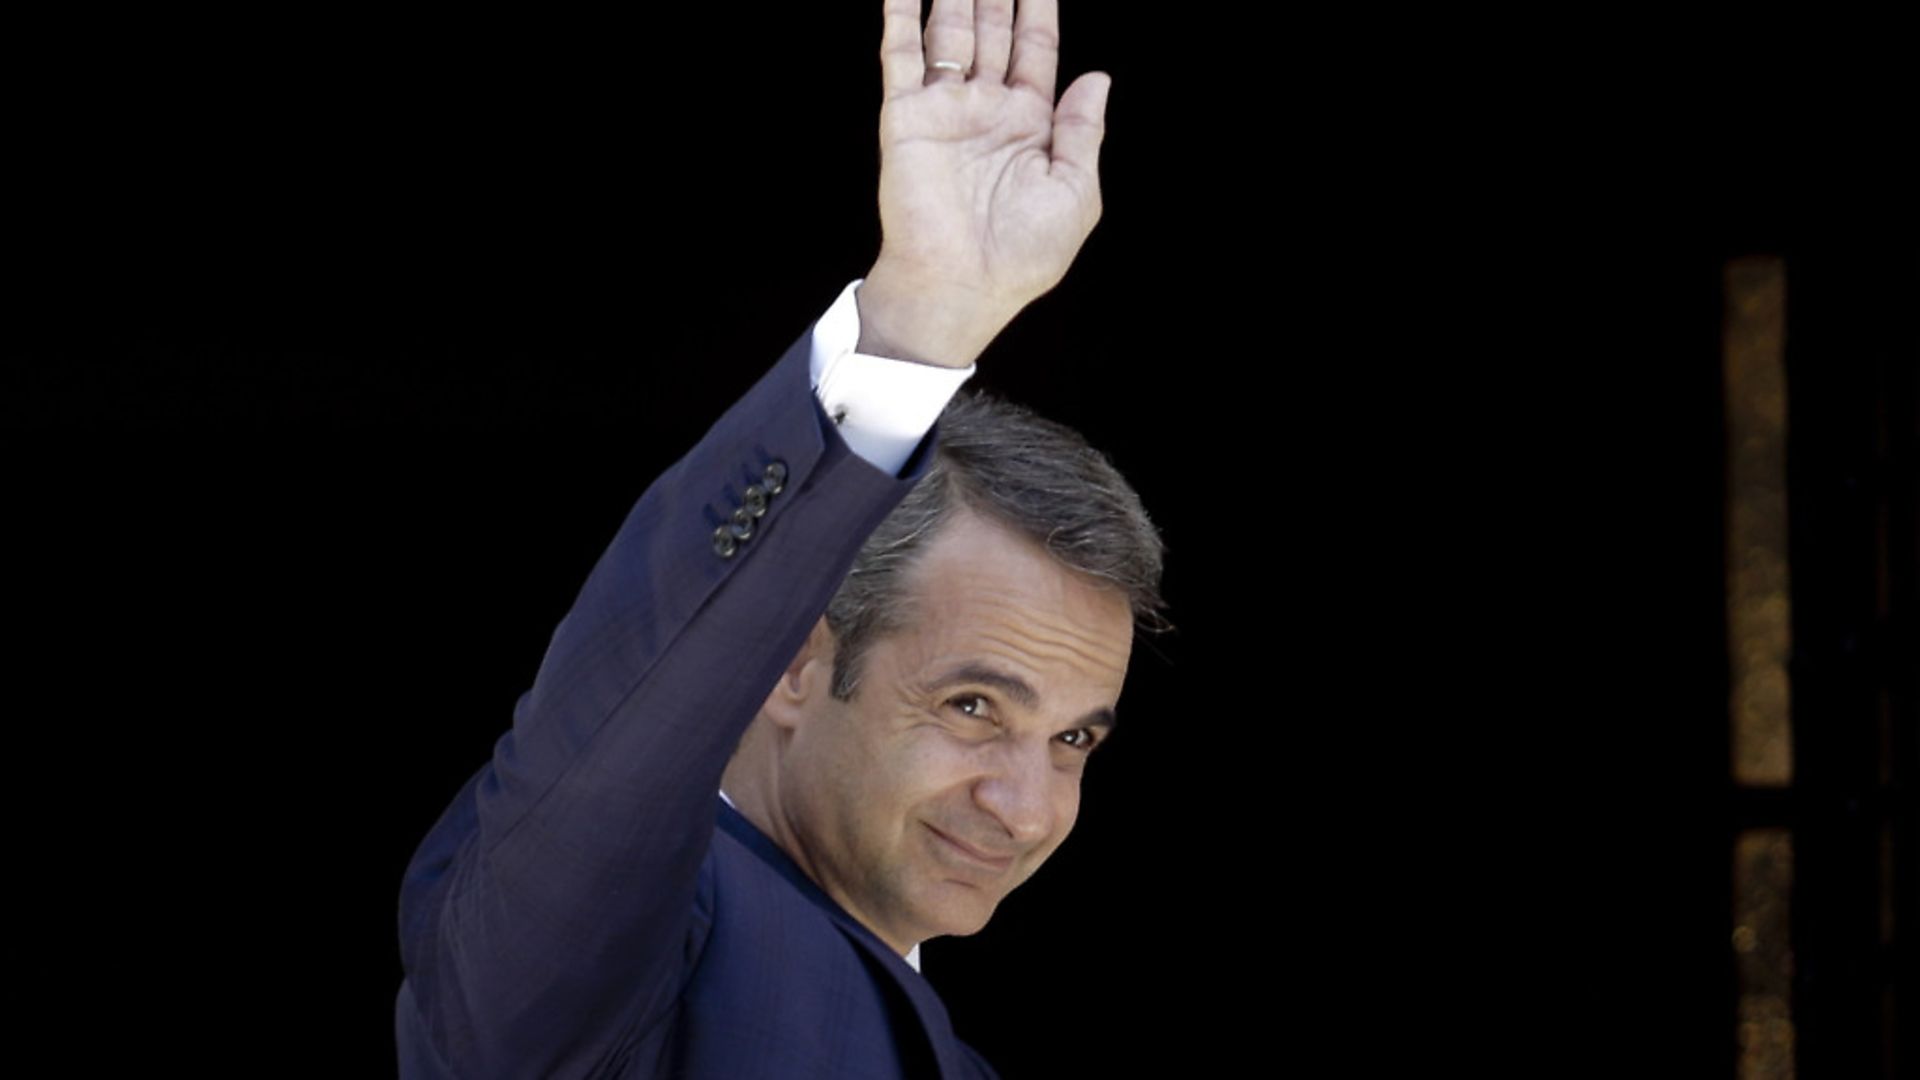 Prime Minister, Kyriakos Mitsotakis enters the Prime Minister's office at Maximos Mantion in Athens, Greece. Photo: Milos Bicanski/Getty Images - Credit: Getty Images